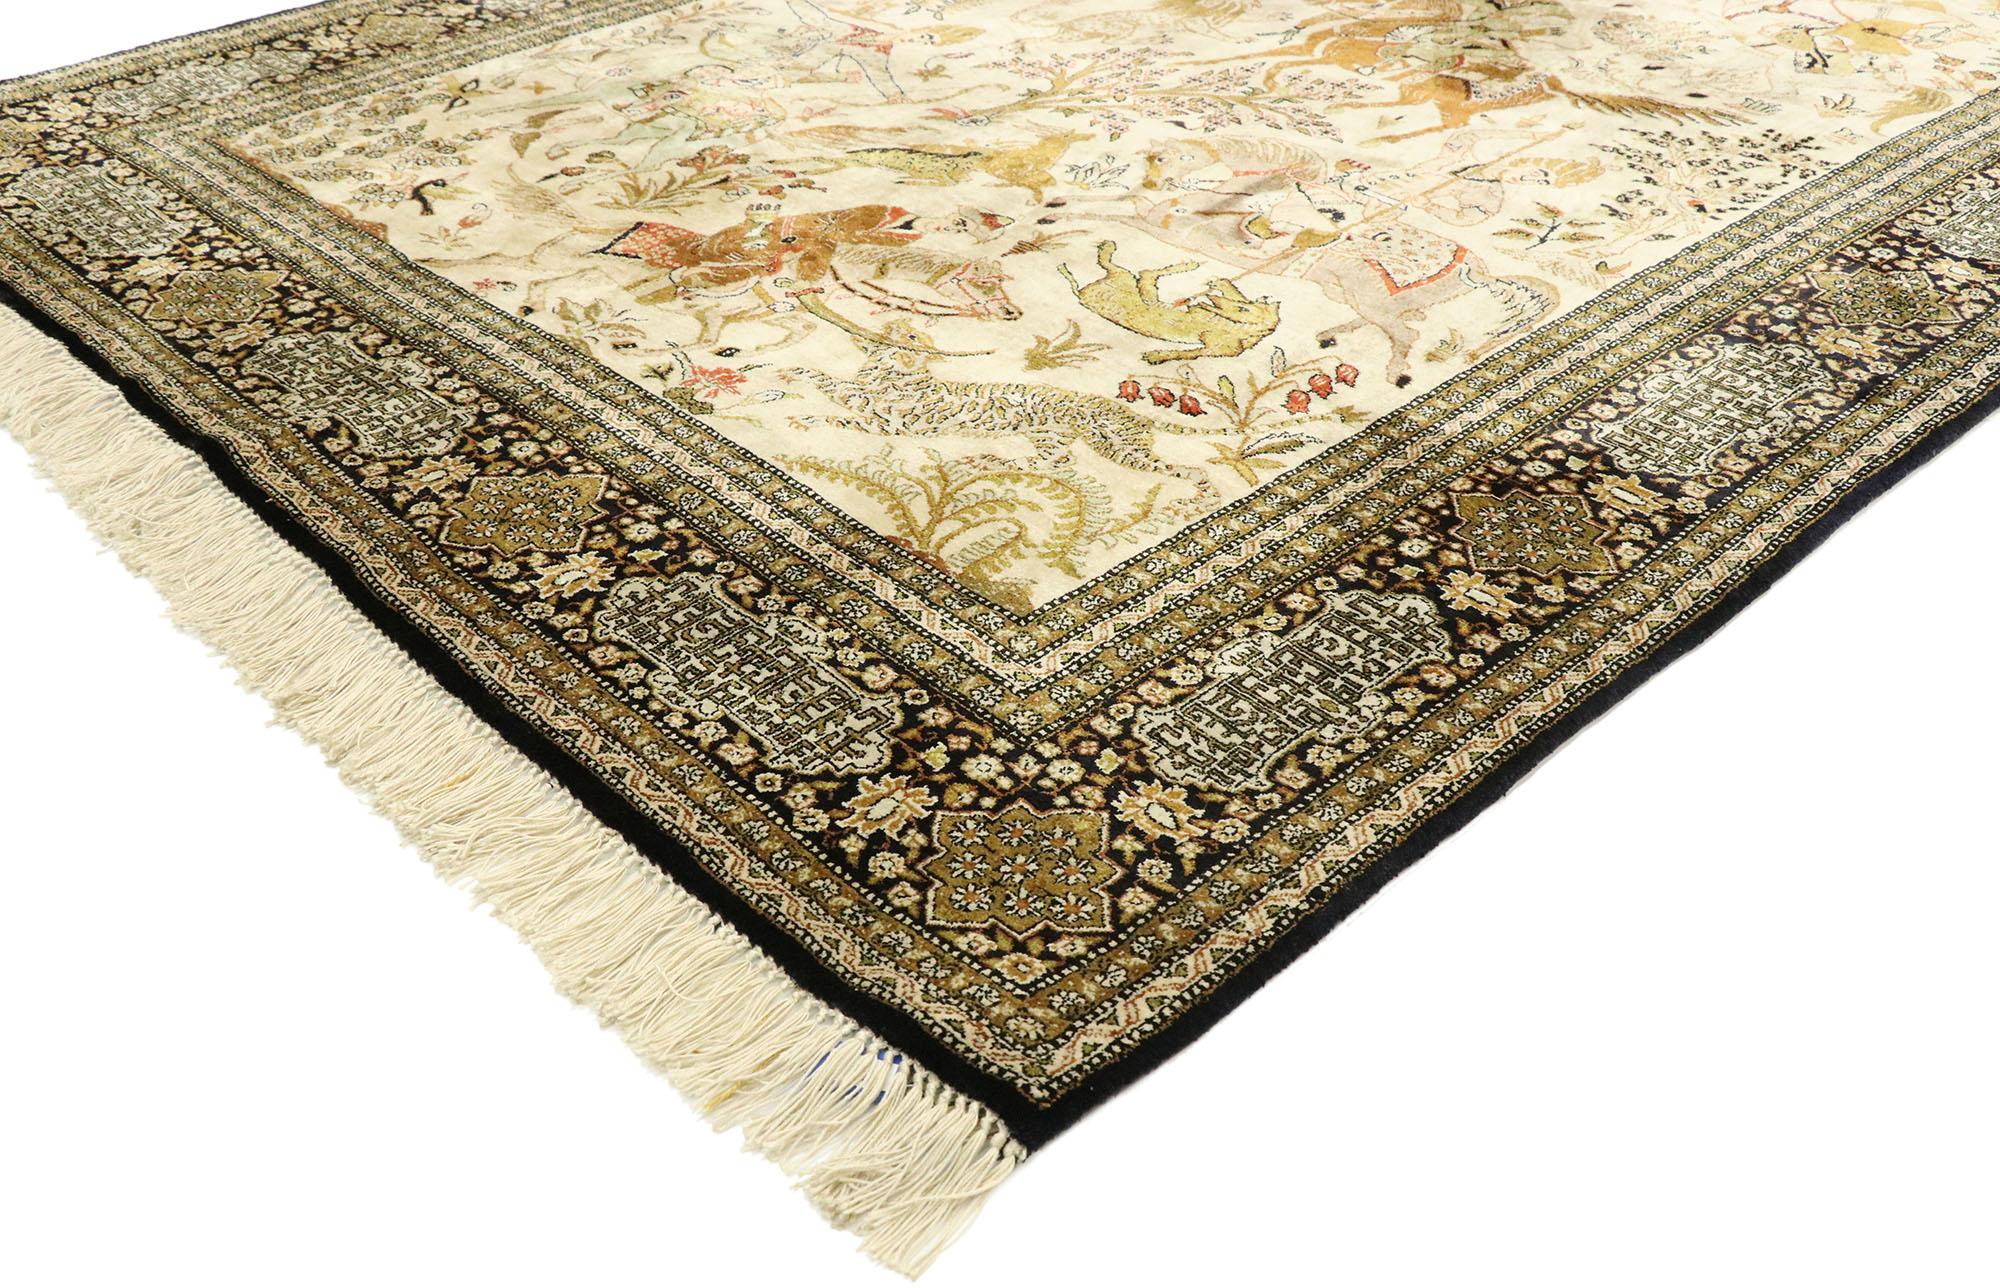 77512, vintage Persian Qum rug with hunting scene. This hand knotted wool vintage Persian Qum rug features a lively pictorial hunting scene against a beige backdrop. The sense of flight is evident as Persian hunters on horseback wrangle beasts such